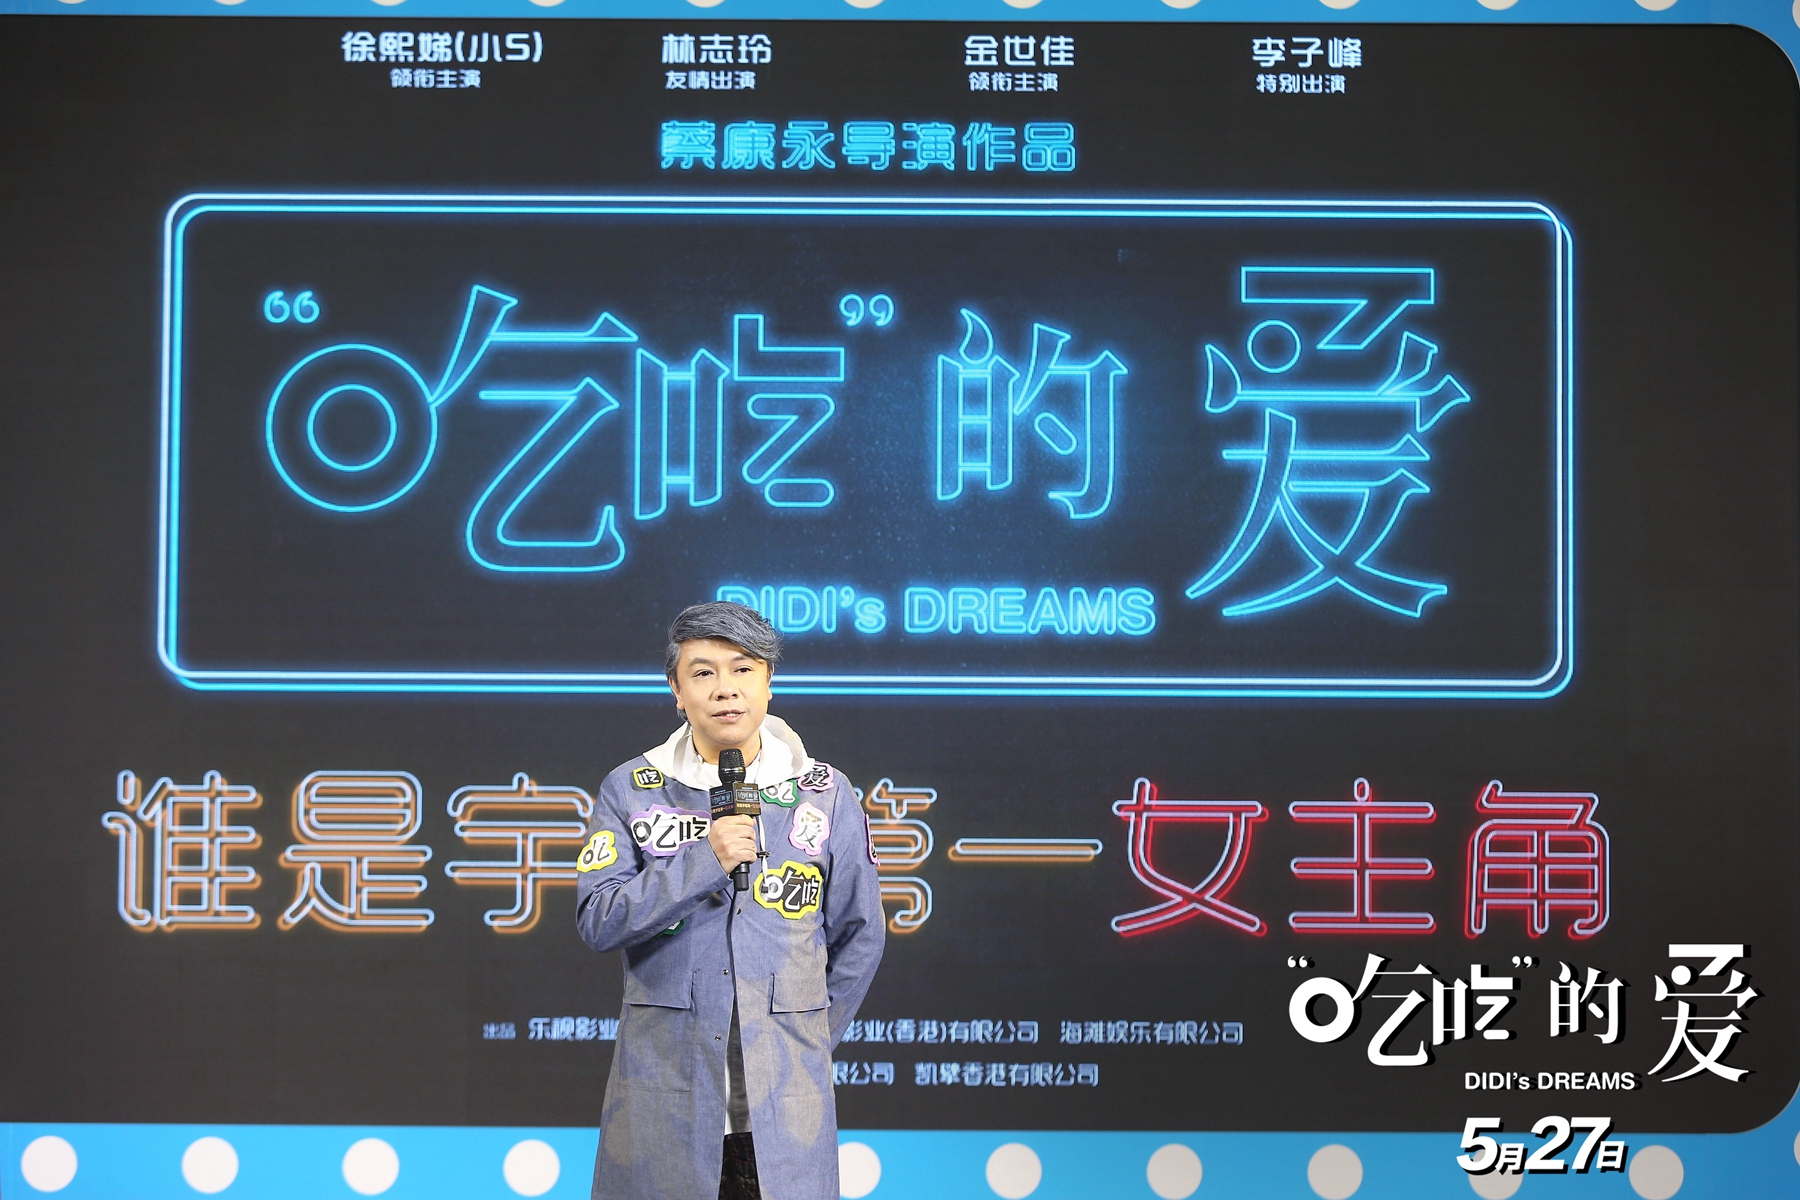 A famous television host and actor from Taiwan, Kevin Tsai, promoted his directorial debut DIDI's Dreams, a romantic comedy, in Beijing on Monday, April 17, 2017. [Photo provided to China Plus]